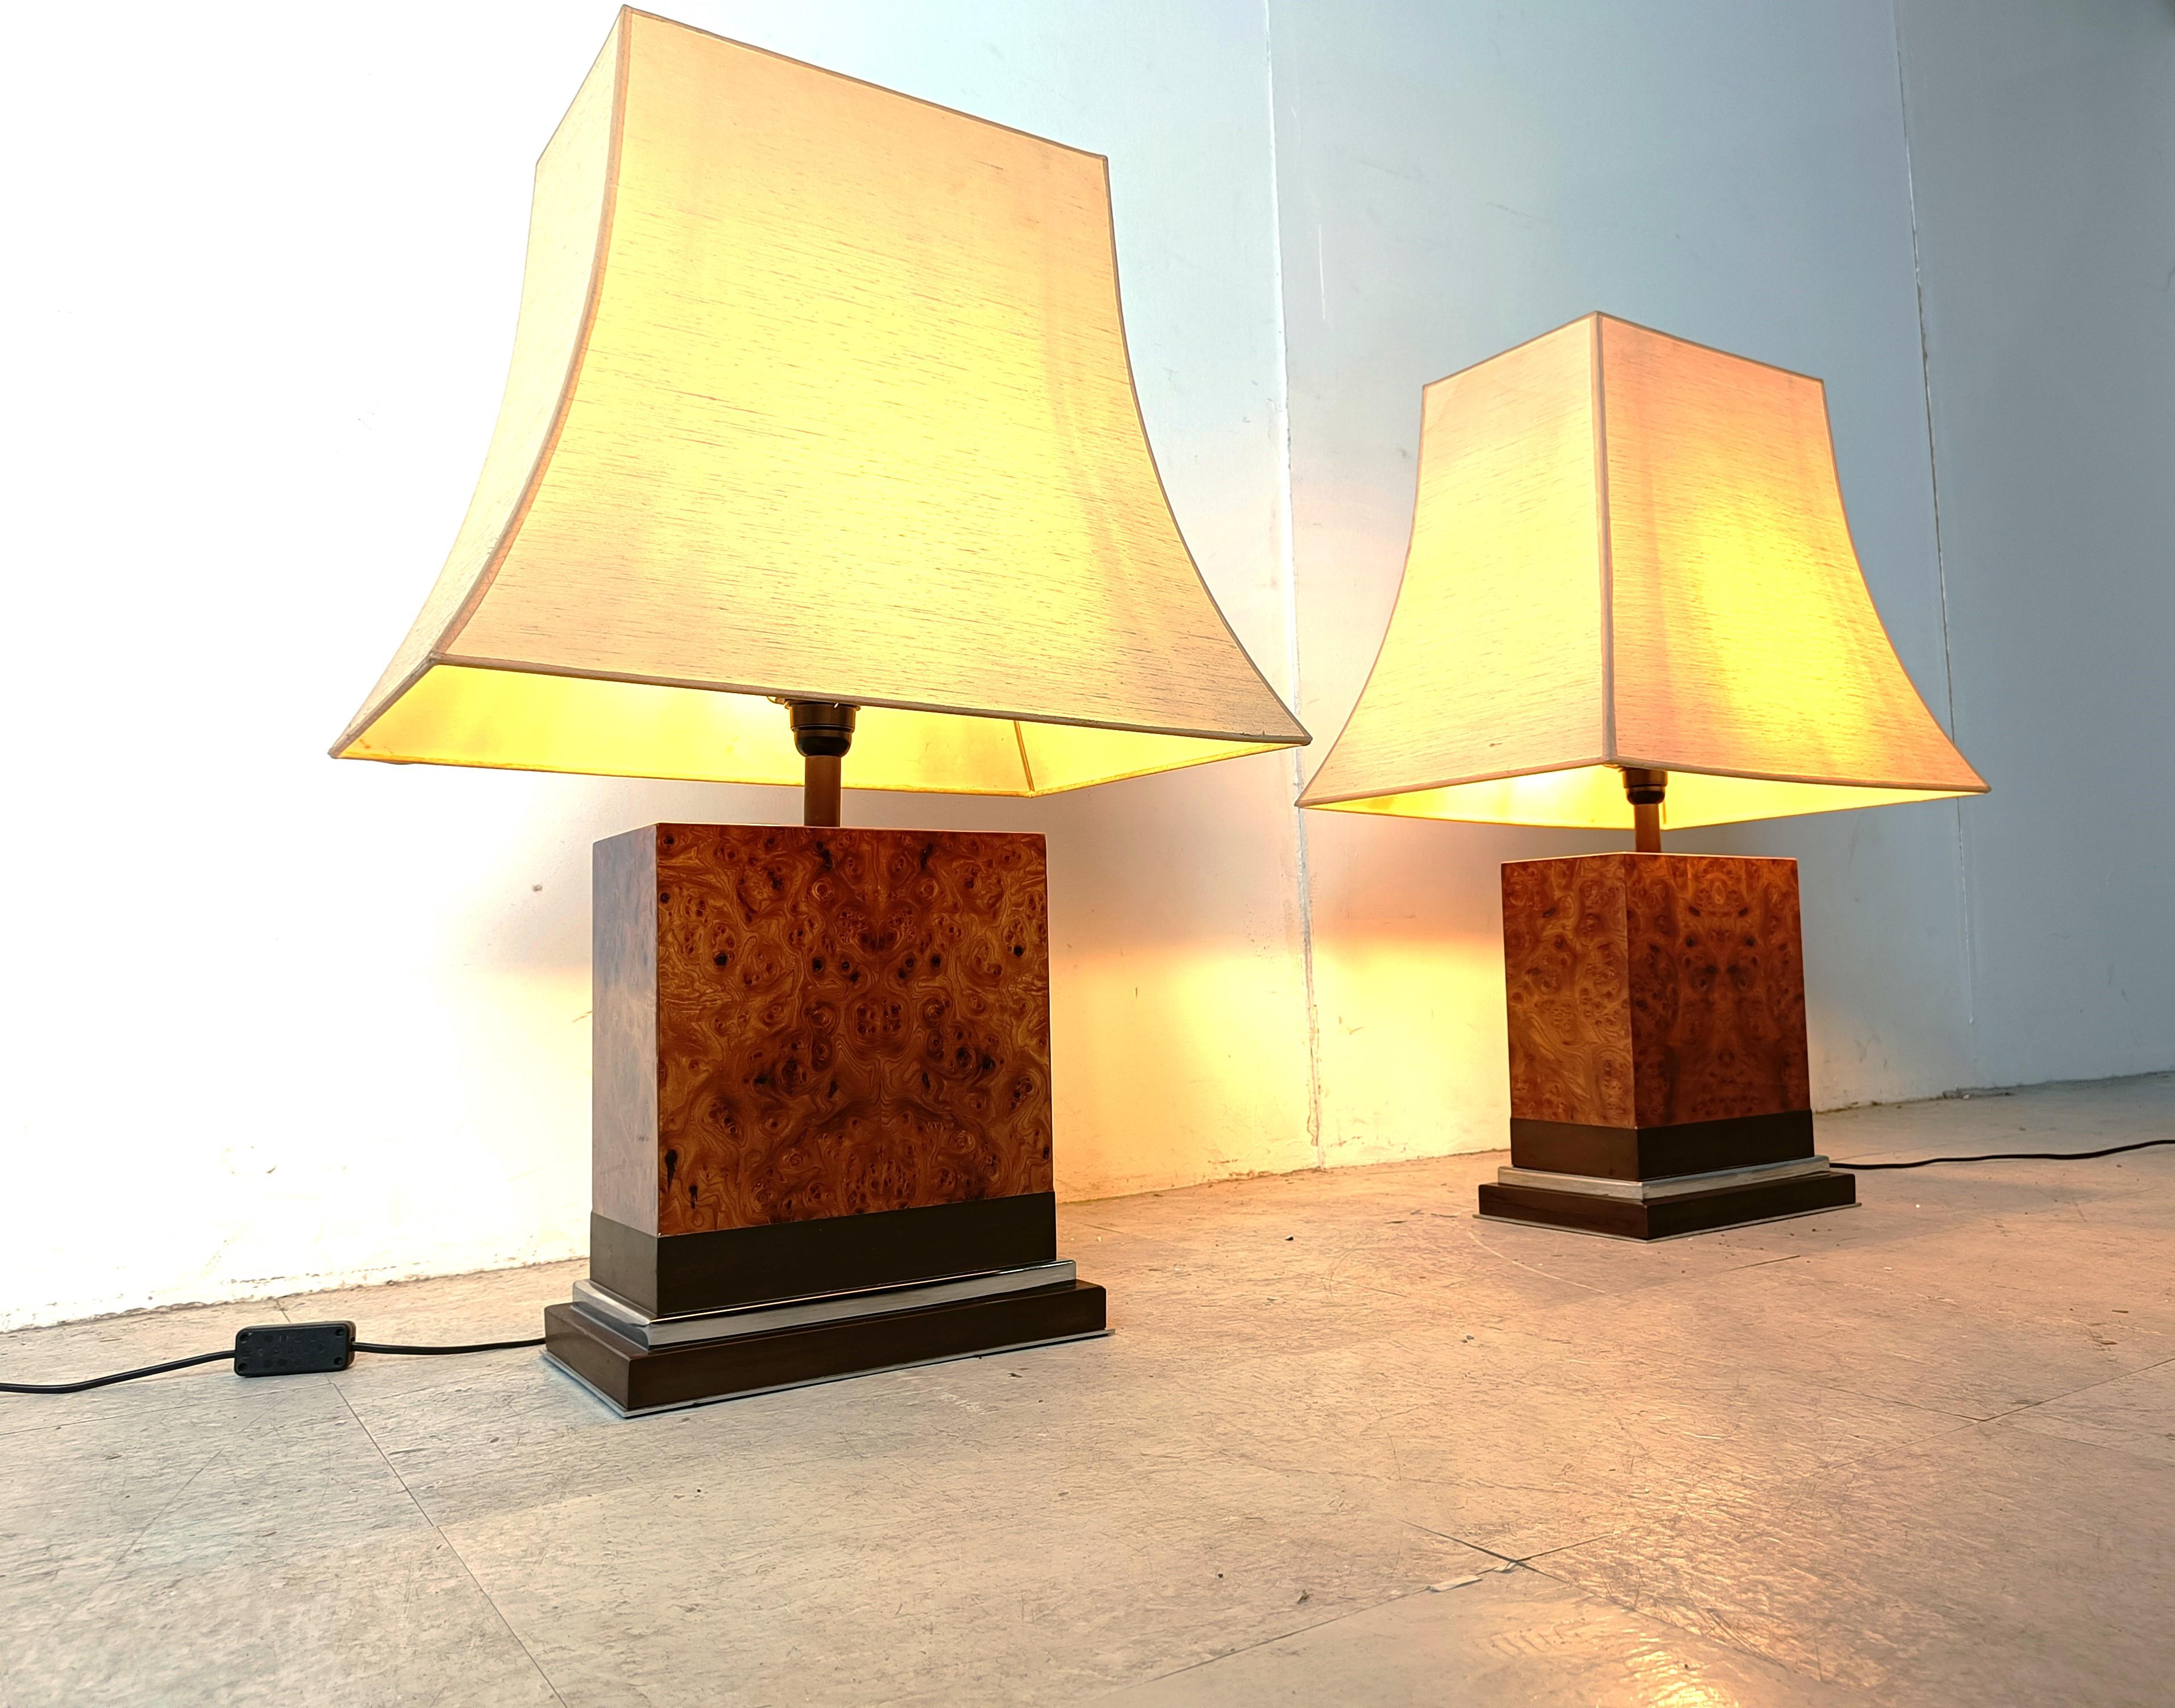 Pair of stunning burl wooden table lamps table lamps by Jean Claude Mahey.

Burl wood mounted on a brass and chrome base with their original lamp shades.

Tested and ready to use with a regular E27 light bulb.

1970s - France

Dimensions:
With lamp